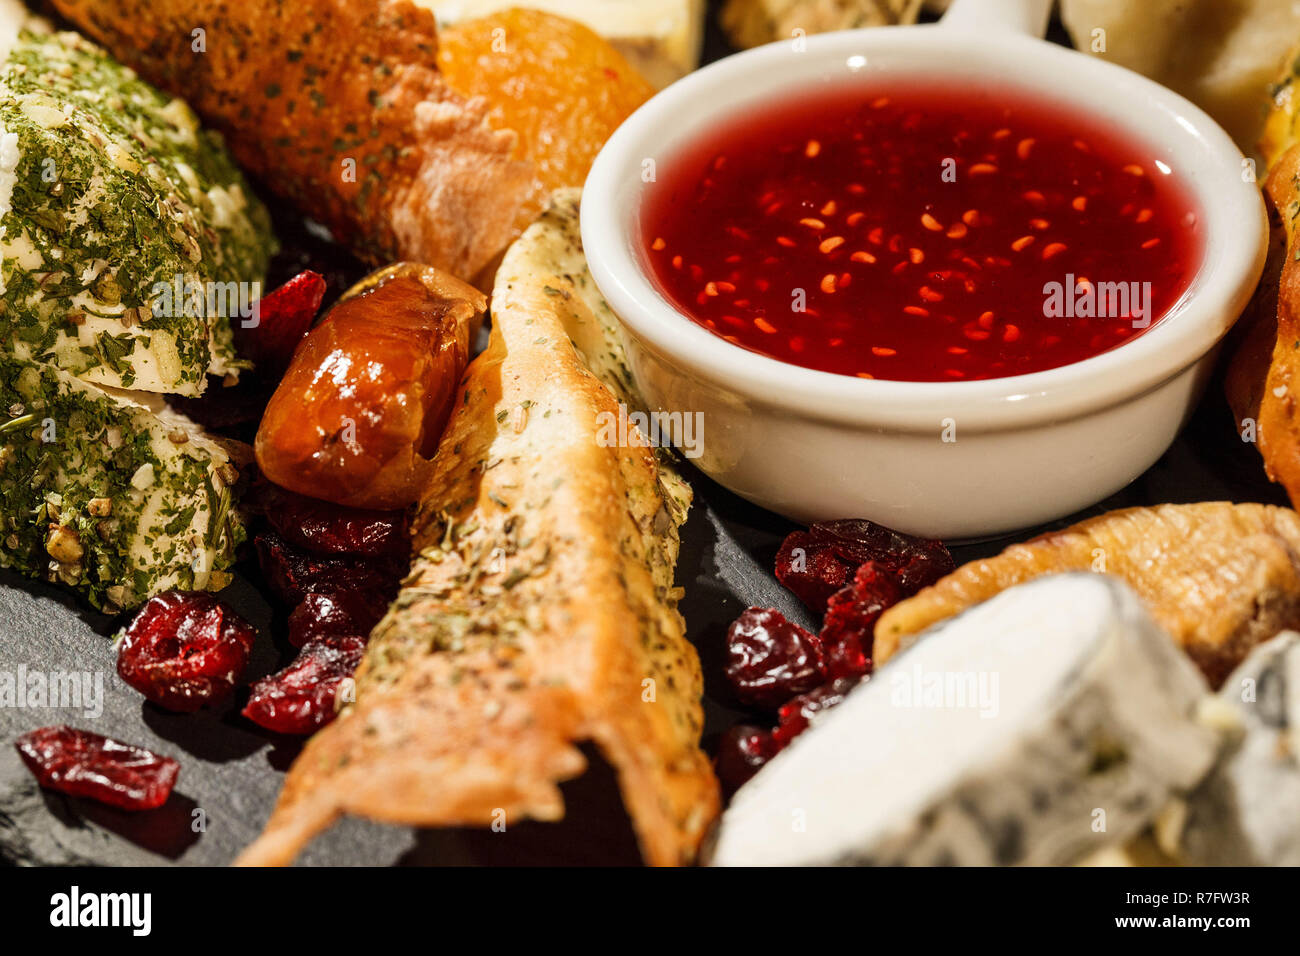 Bowl with cranberry sauce stands between pieces of cheese on black plate Stock Photo